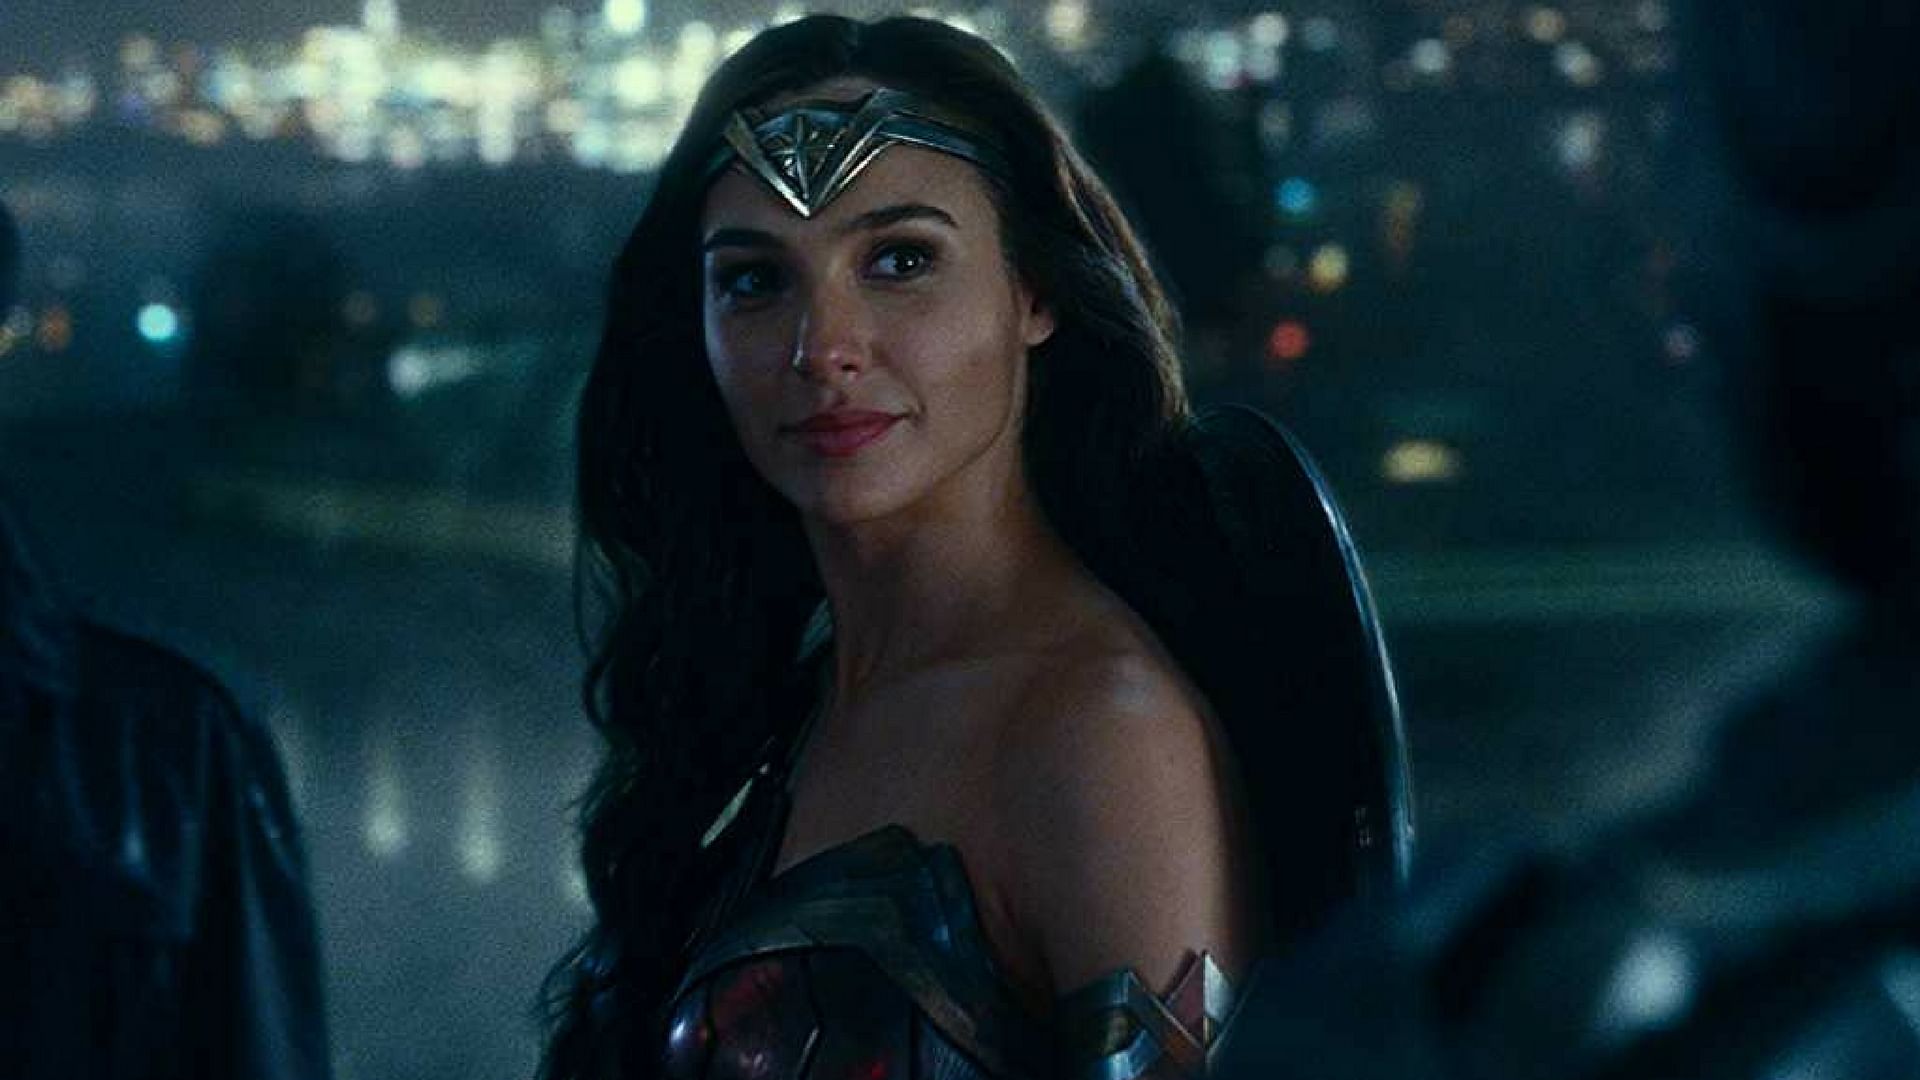 Gal Gadot as Wonder Woman in her upcoming film “Justice League”